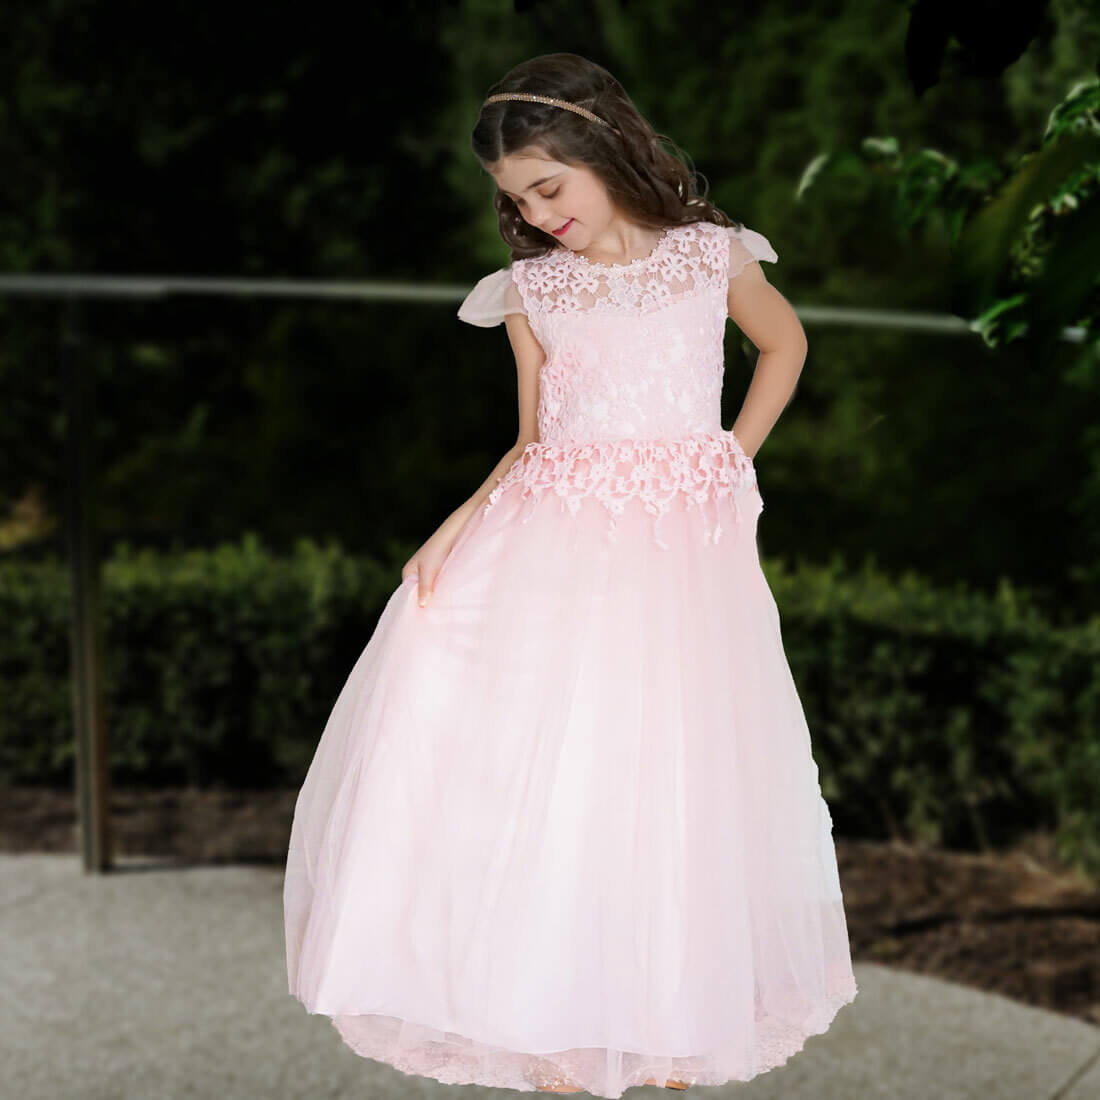 Little girl in a long pink gown